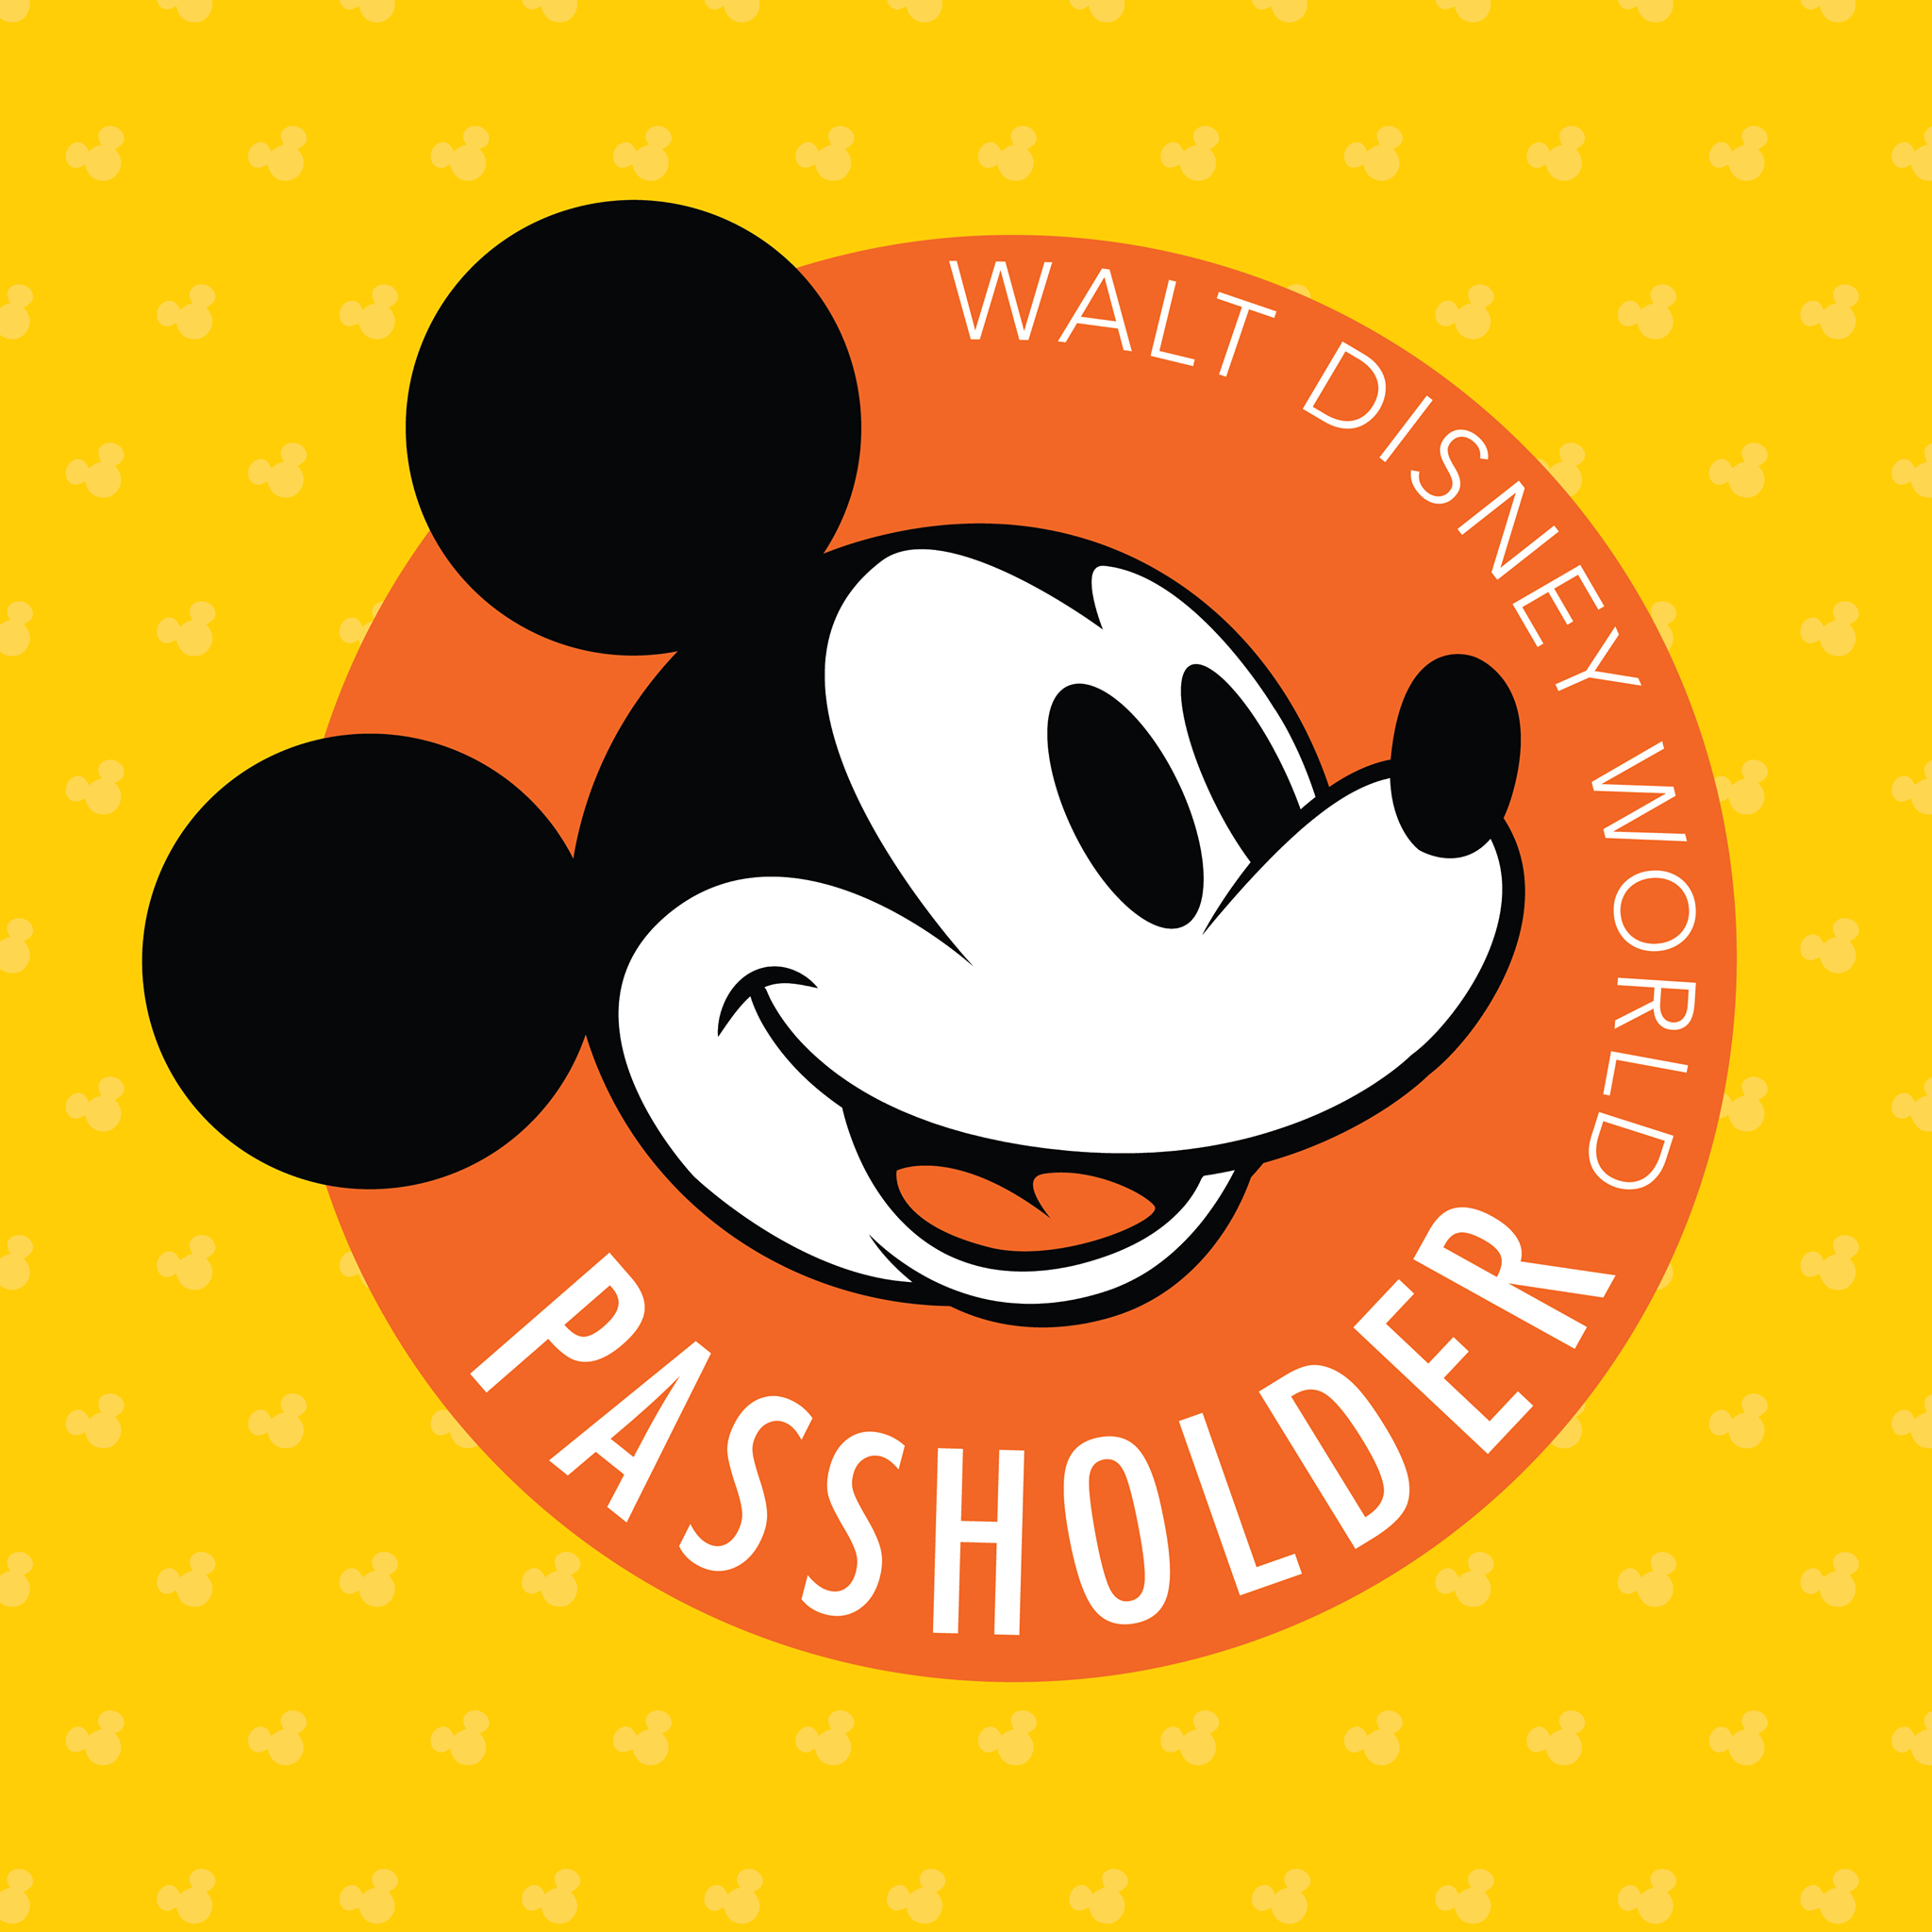 Annual Passholder Exclusive Weekday Offerings coming to Disney’s Animal Kingdom